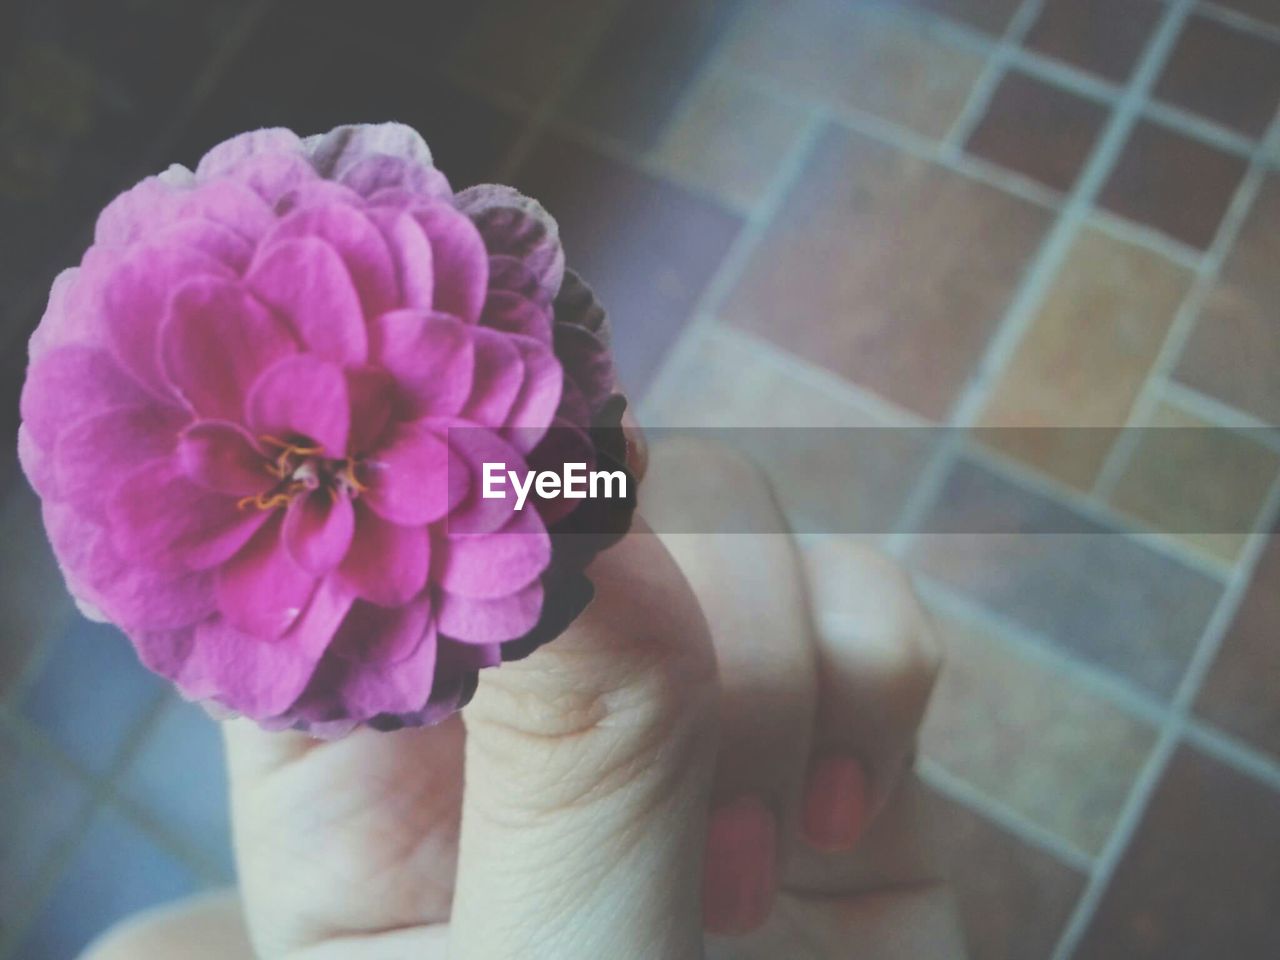 Cropped image of hand holding pink flower